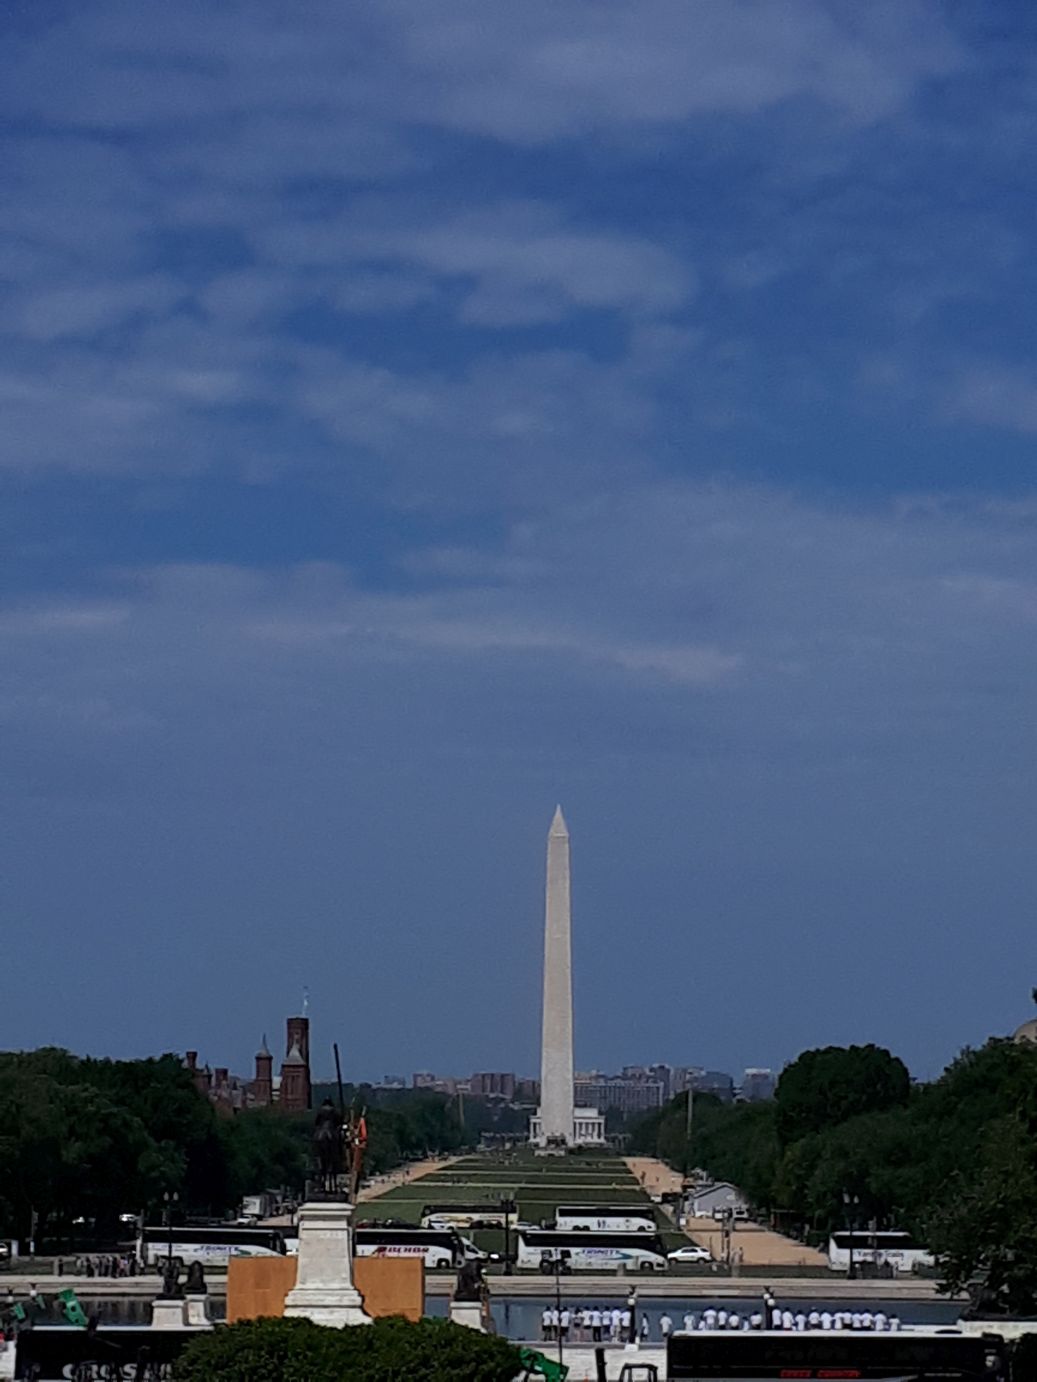 Image of The Presidential Monument in Washington